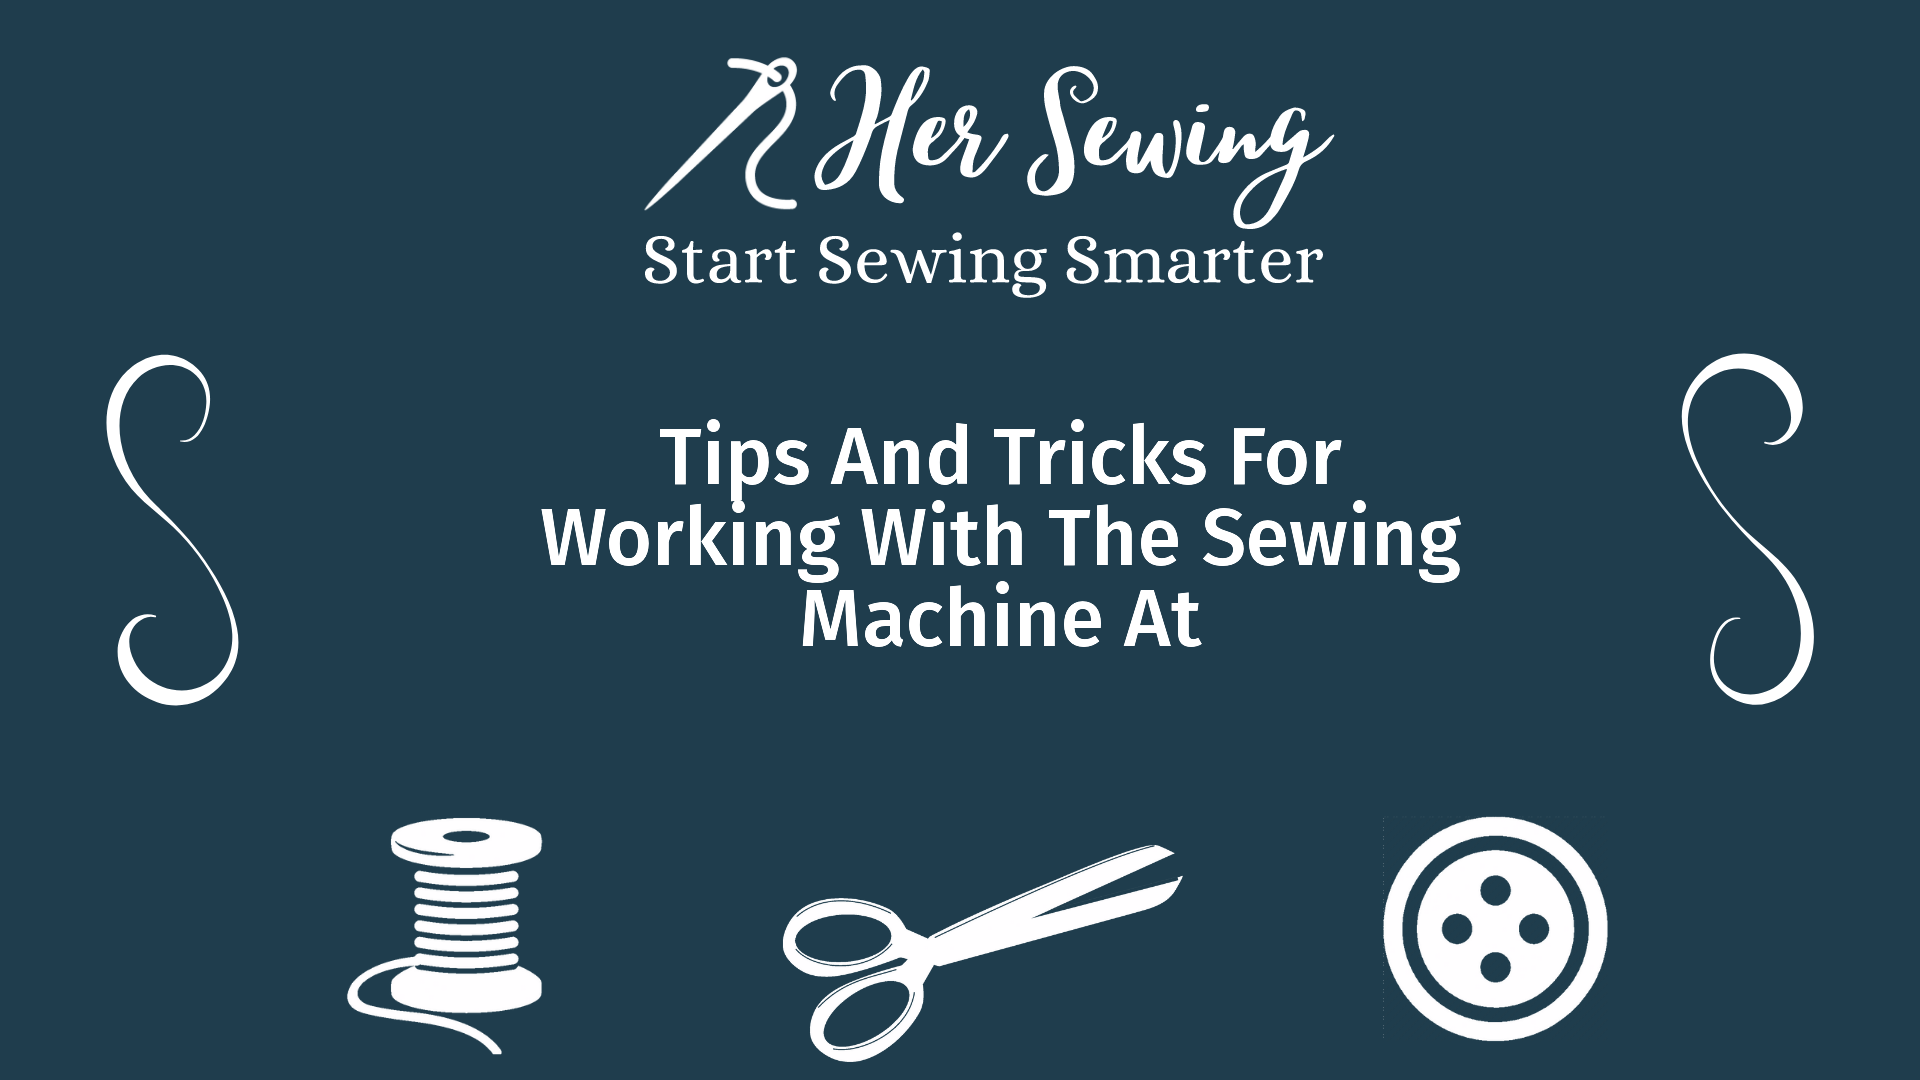 Tips And Tricks For Working With The Sewing Machine At